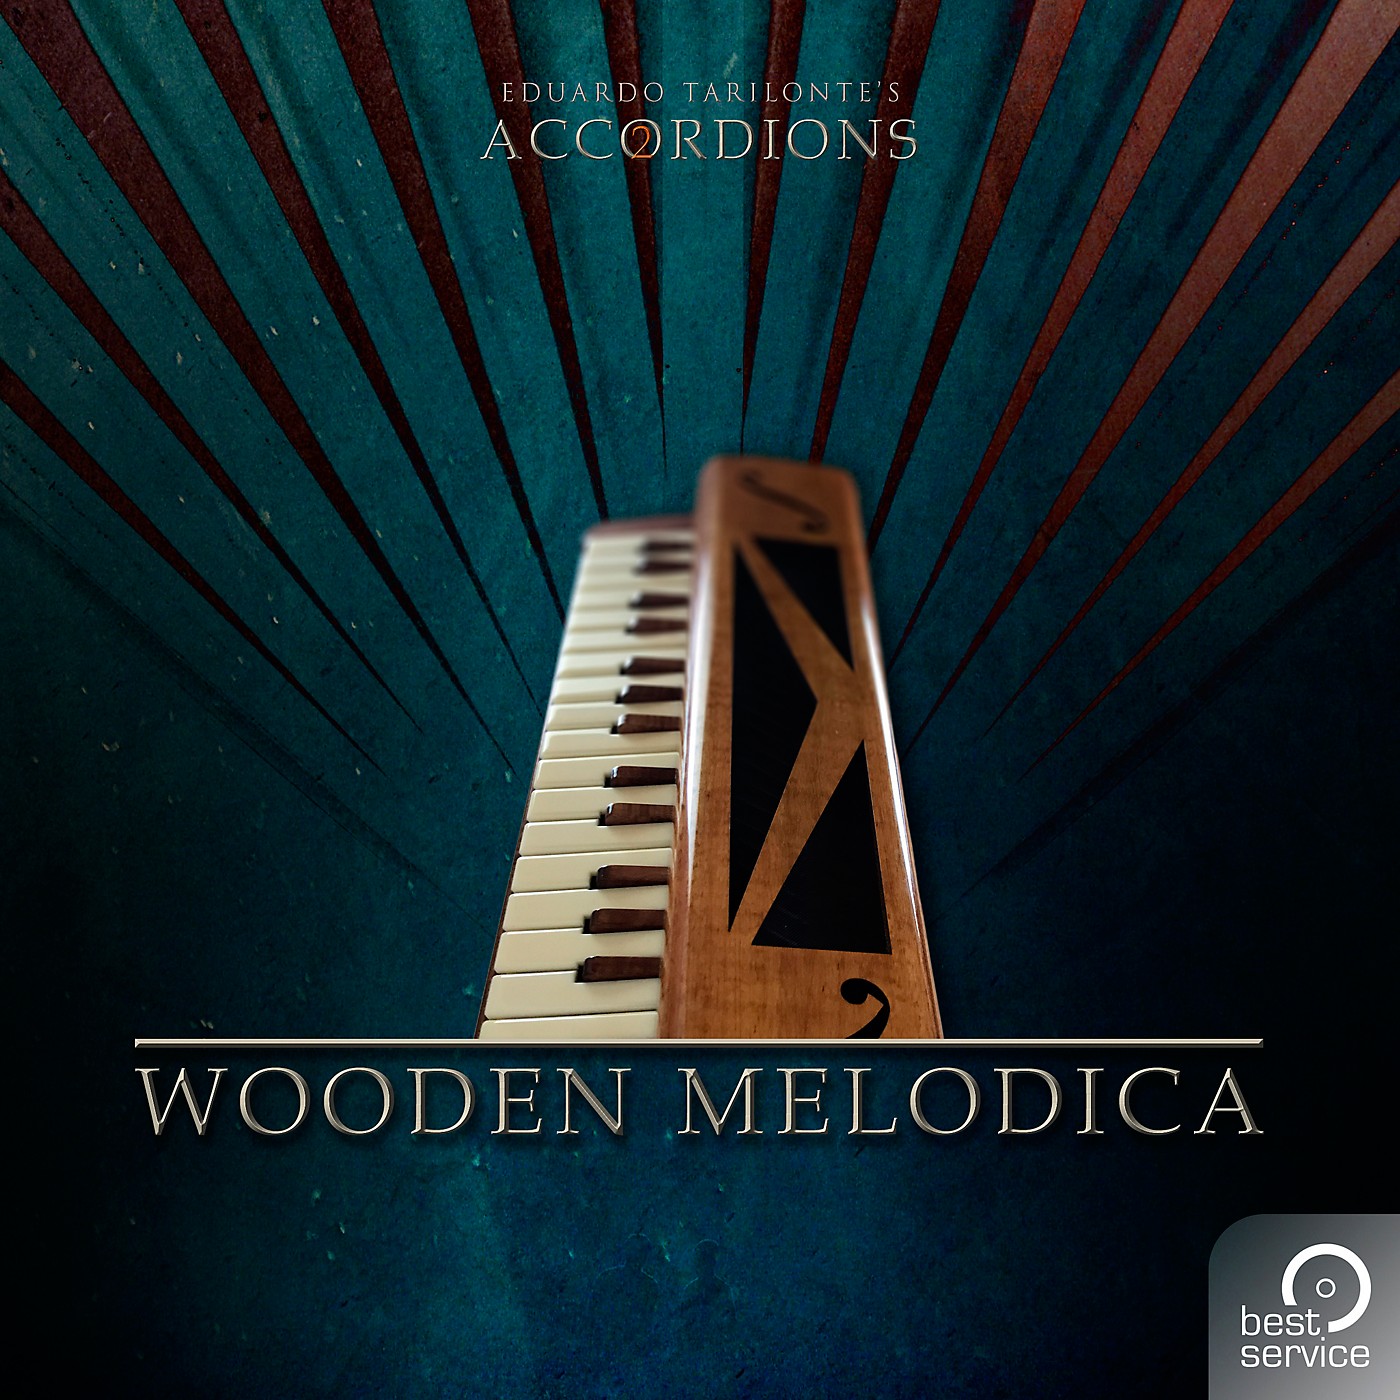 Best Service Accordions 2 - Single Wooden Melodica thumbnail